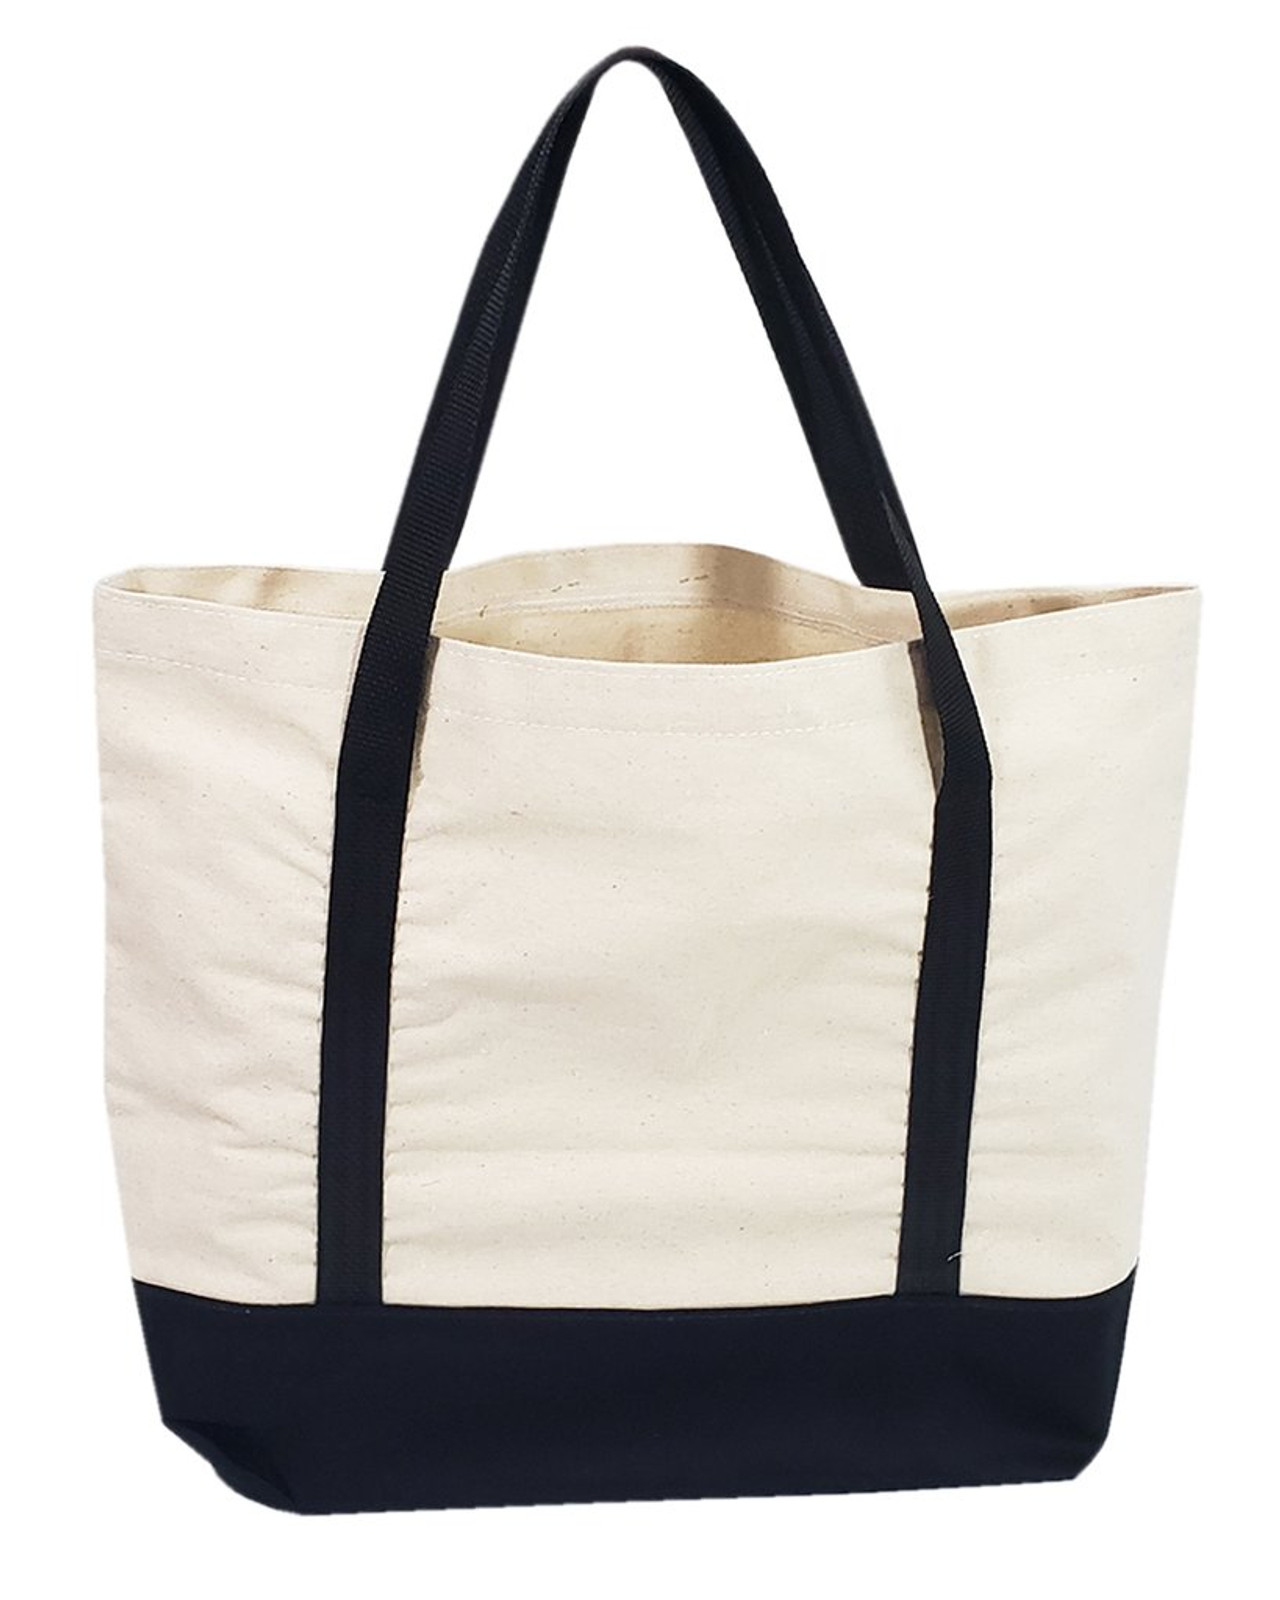 Extra Large Canvas Tote Bags Wholesale w/ Hook and Loop Closure